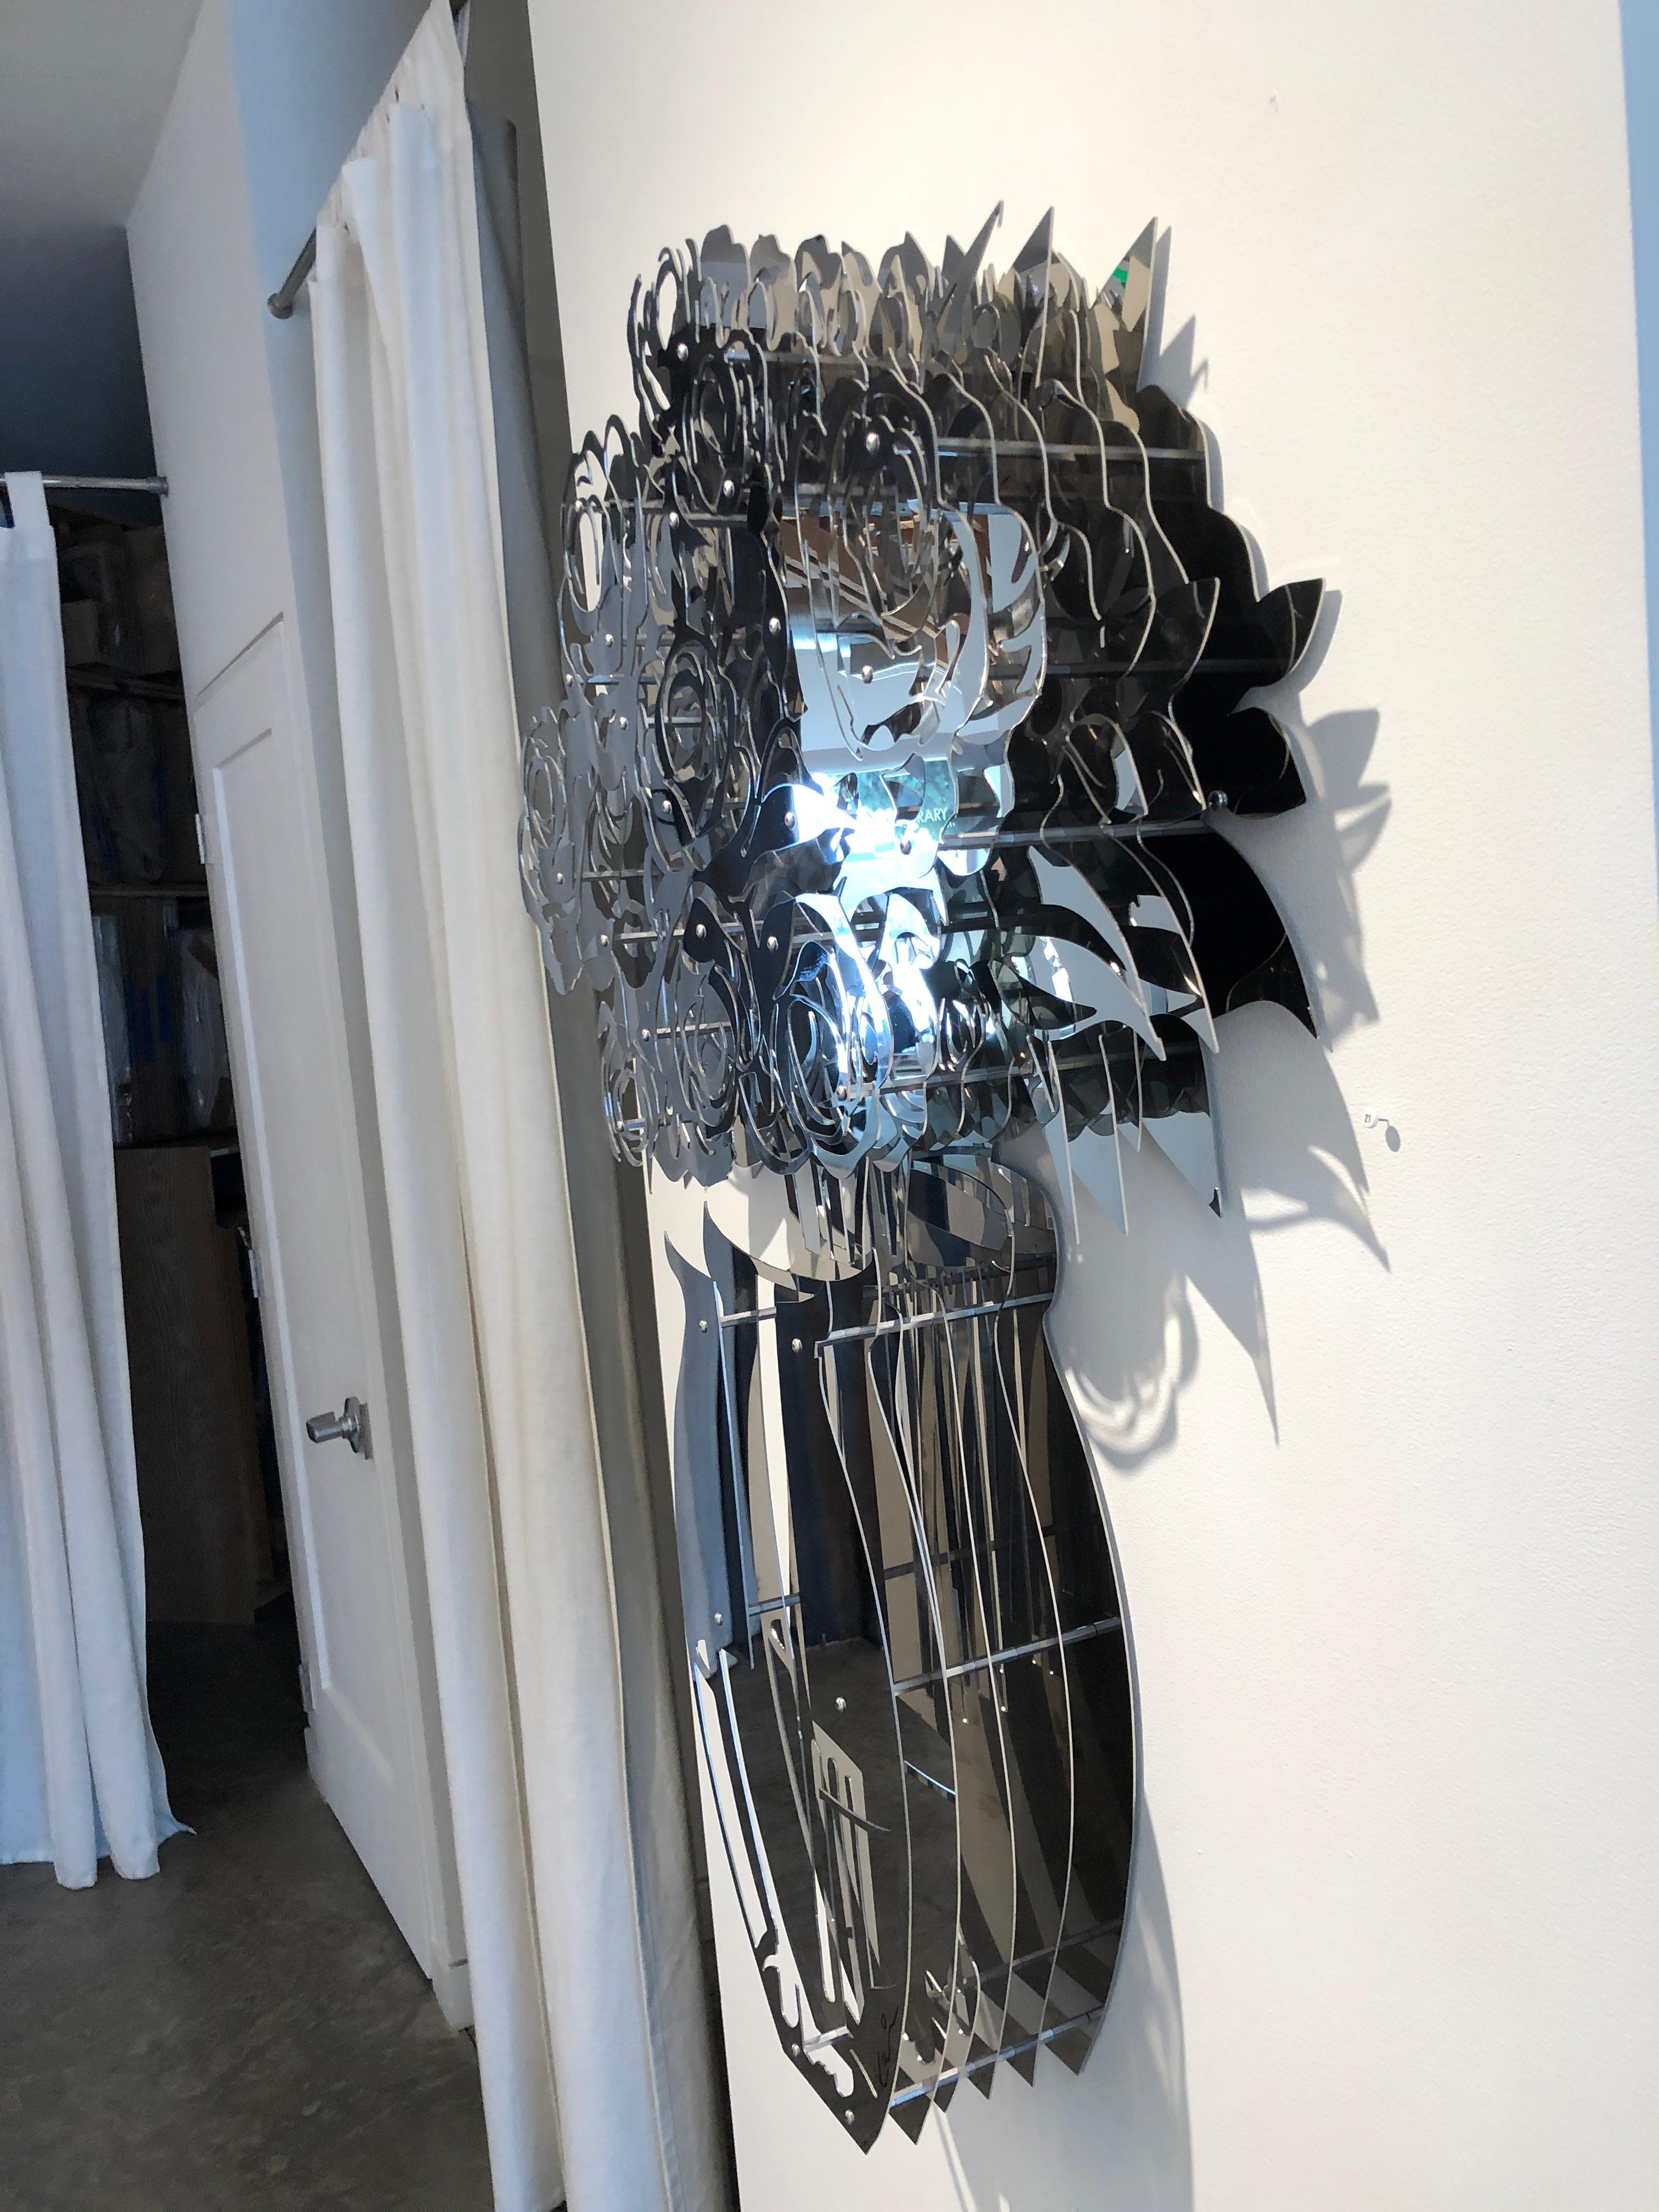 Vase of Roses - Mirrored Stainless 42 - Sculpture by Michael Kalish